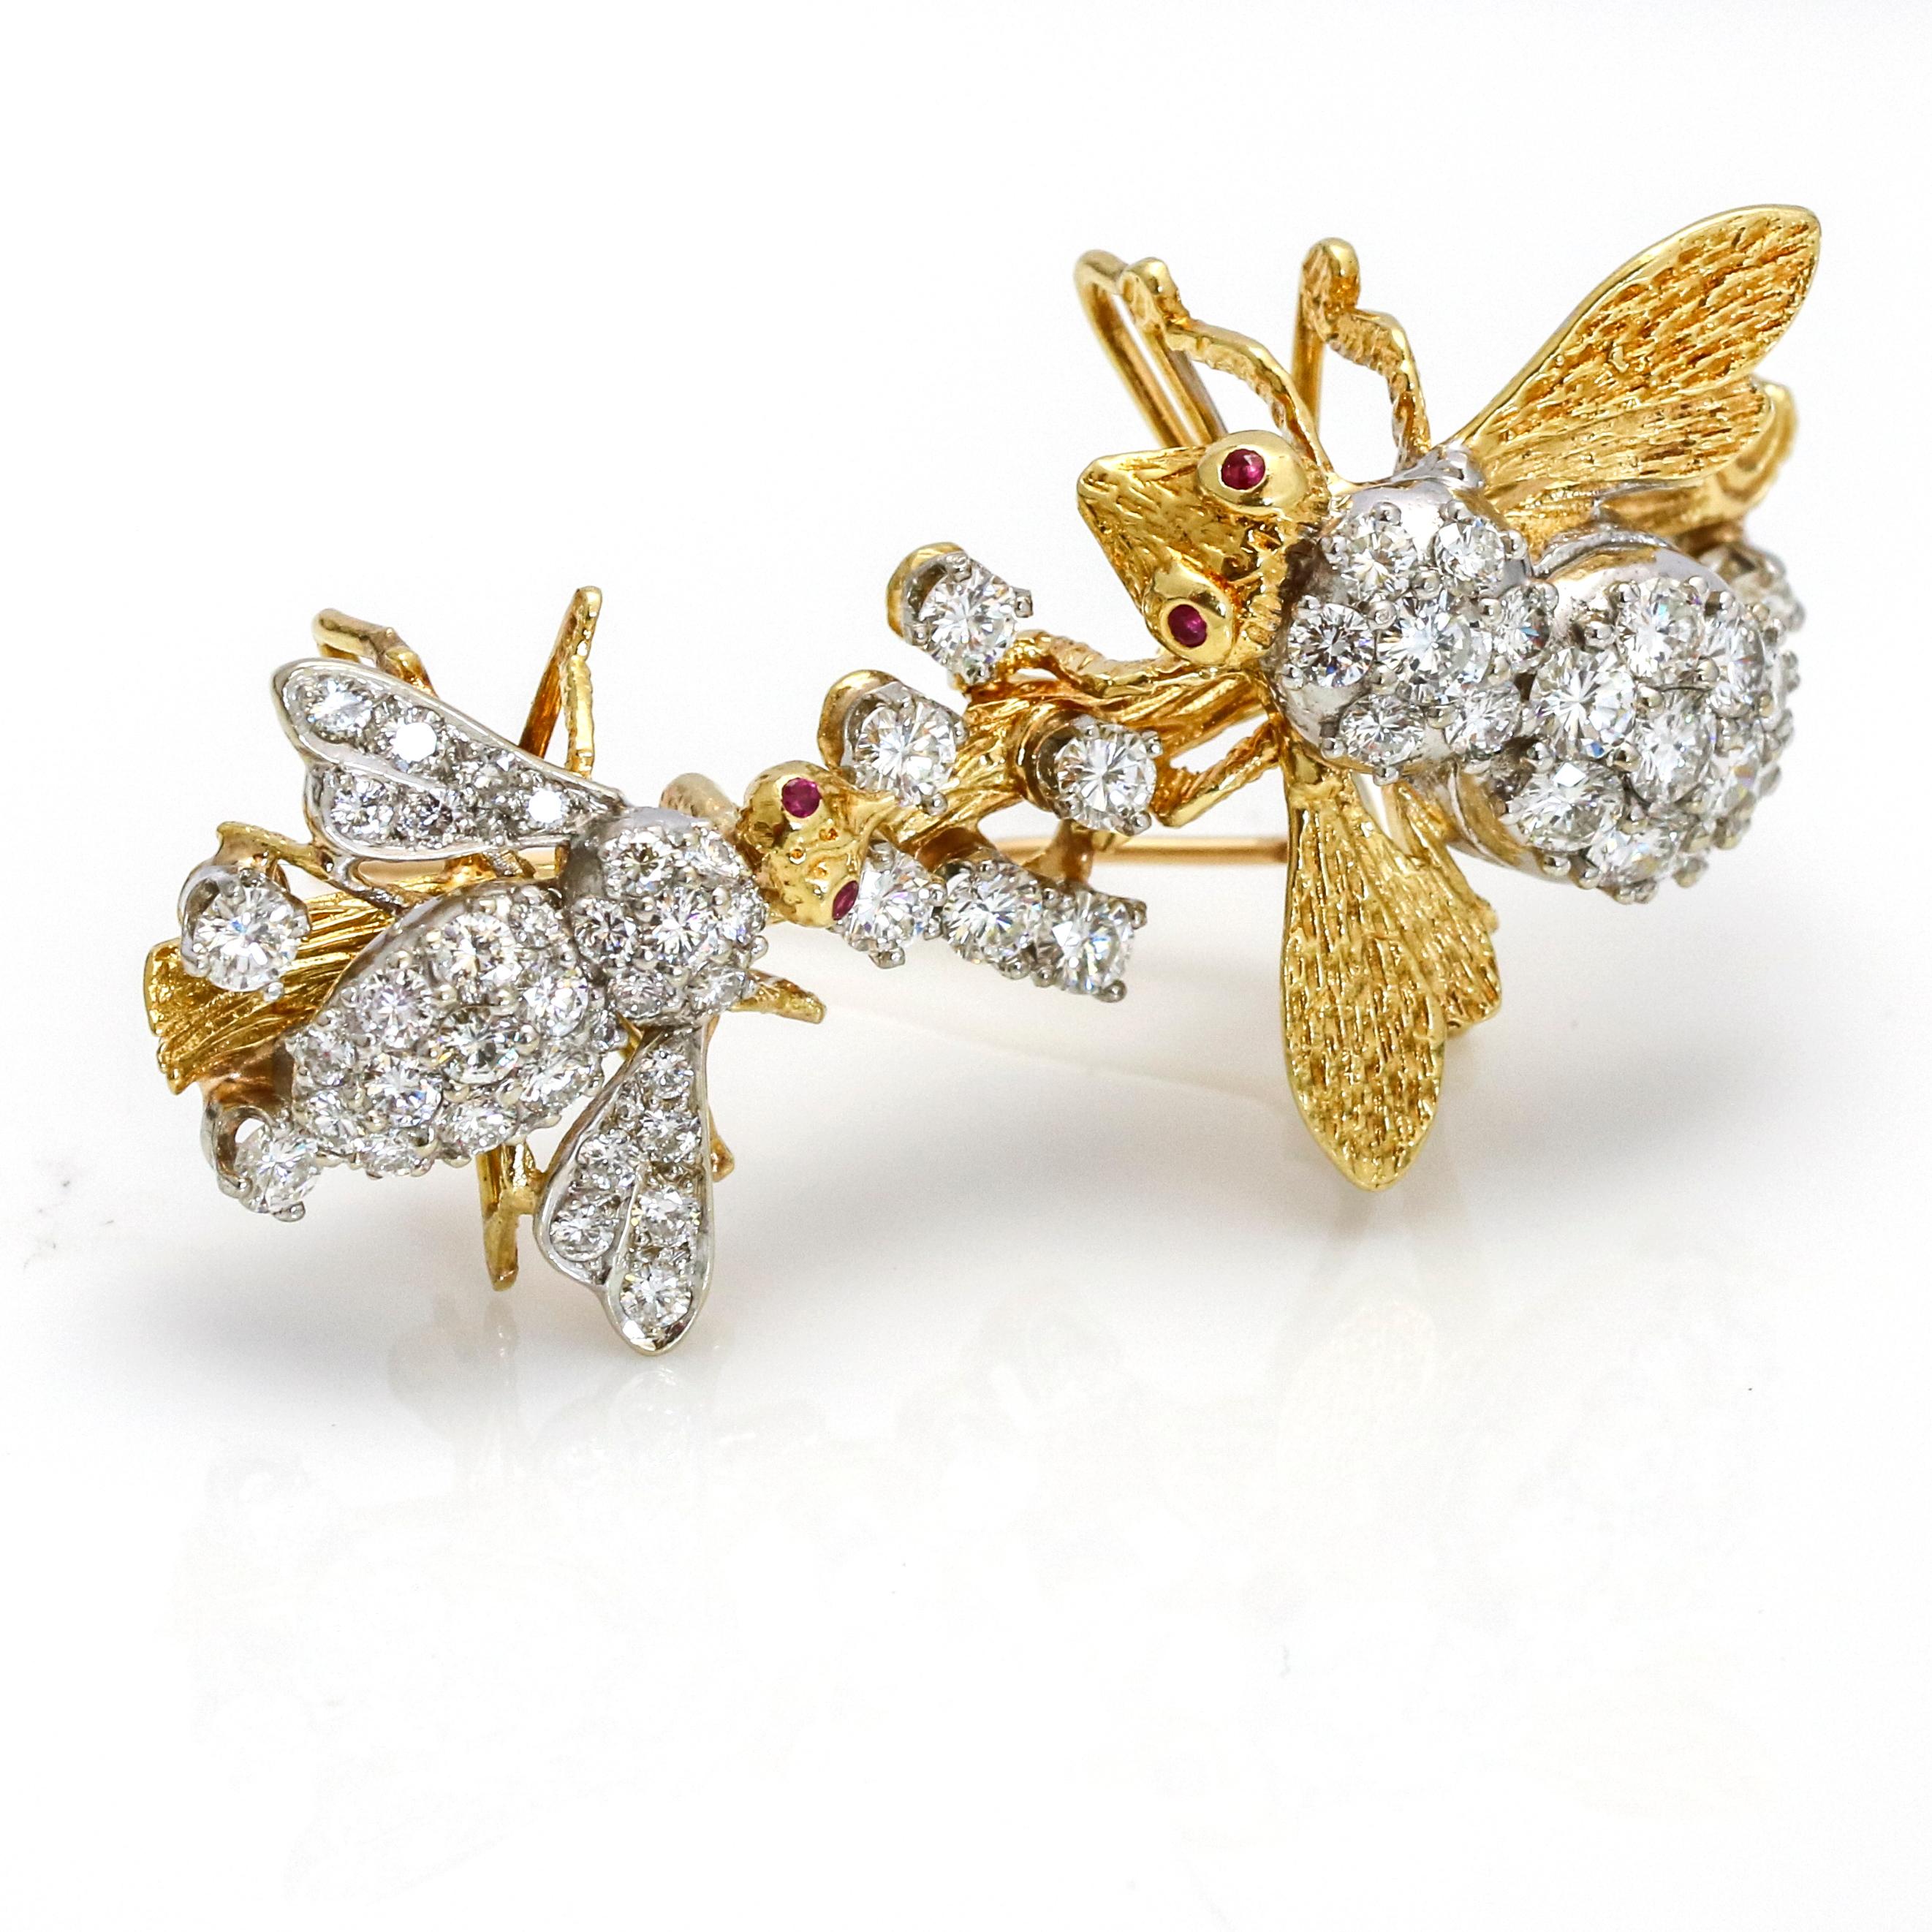 5.00 Carat 18 Karat Yellow Gold Platinum Diamond Bee Brooch In Good Condition For Sale In Fort Lauderdale, FL